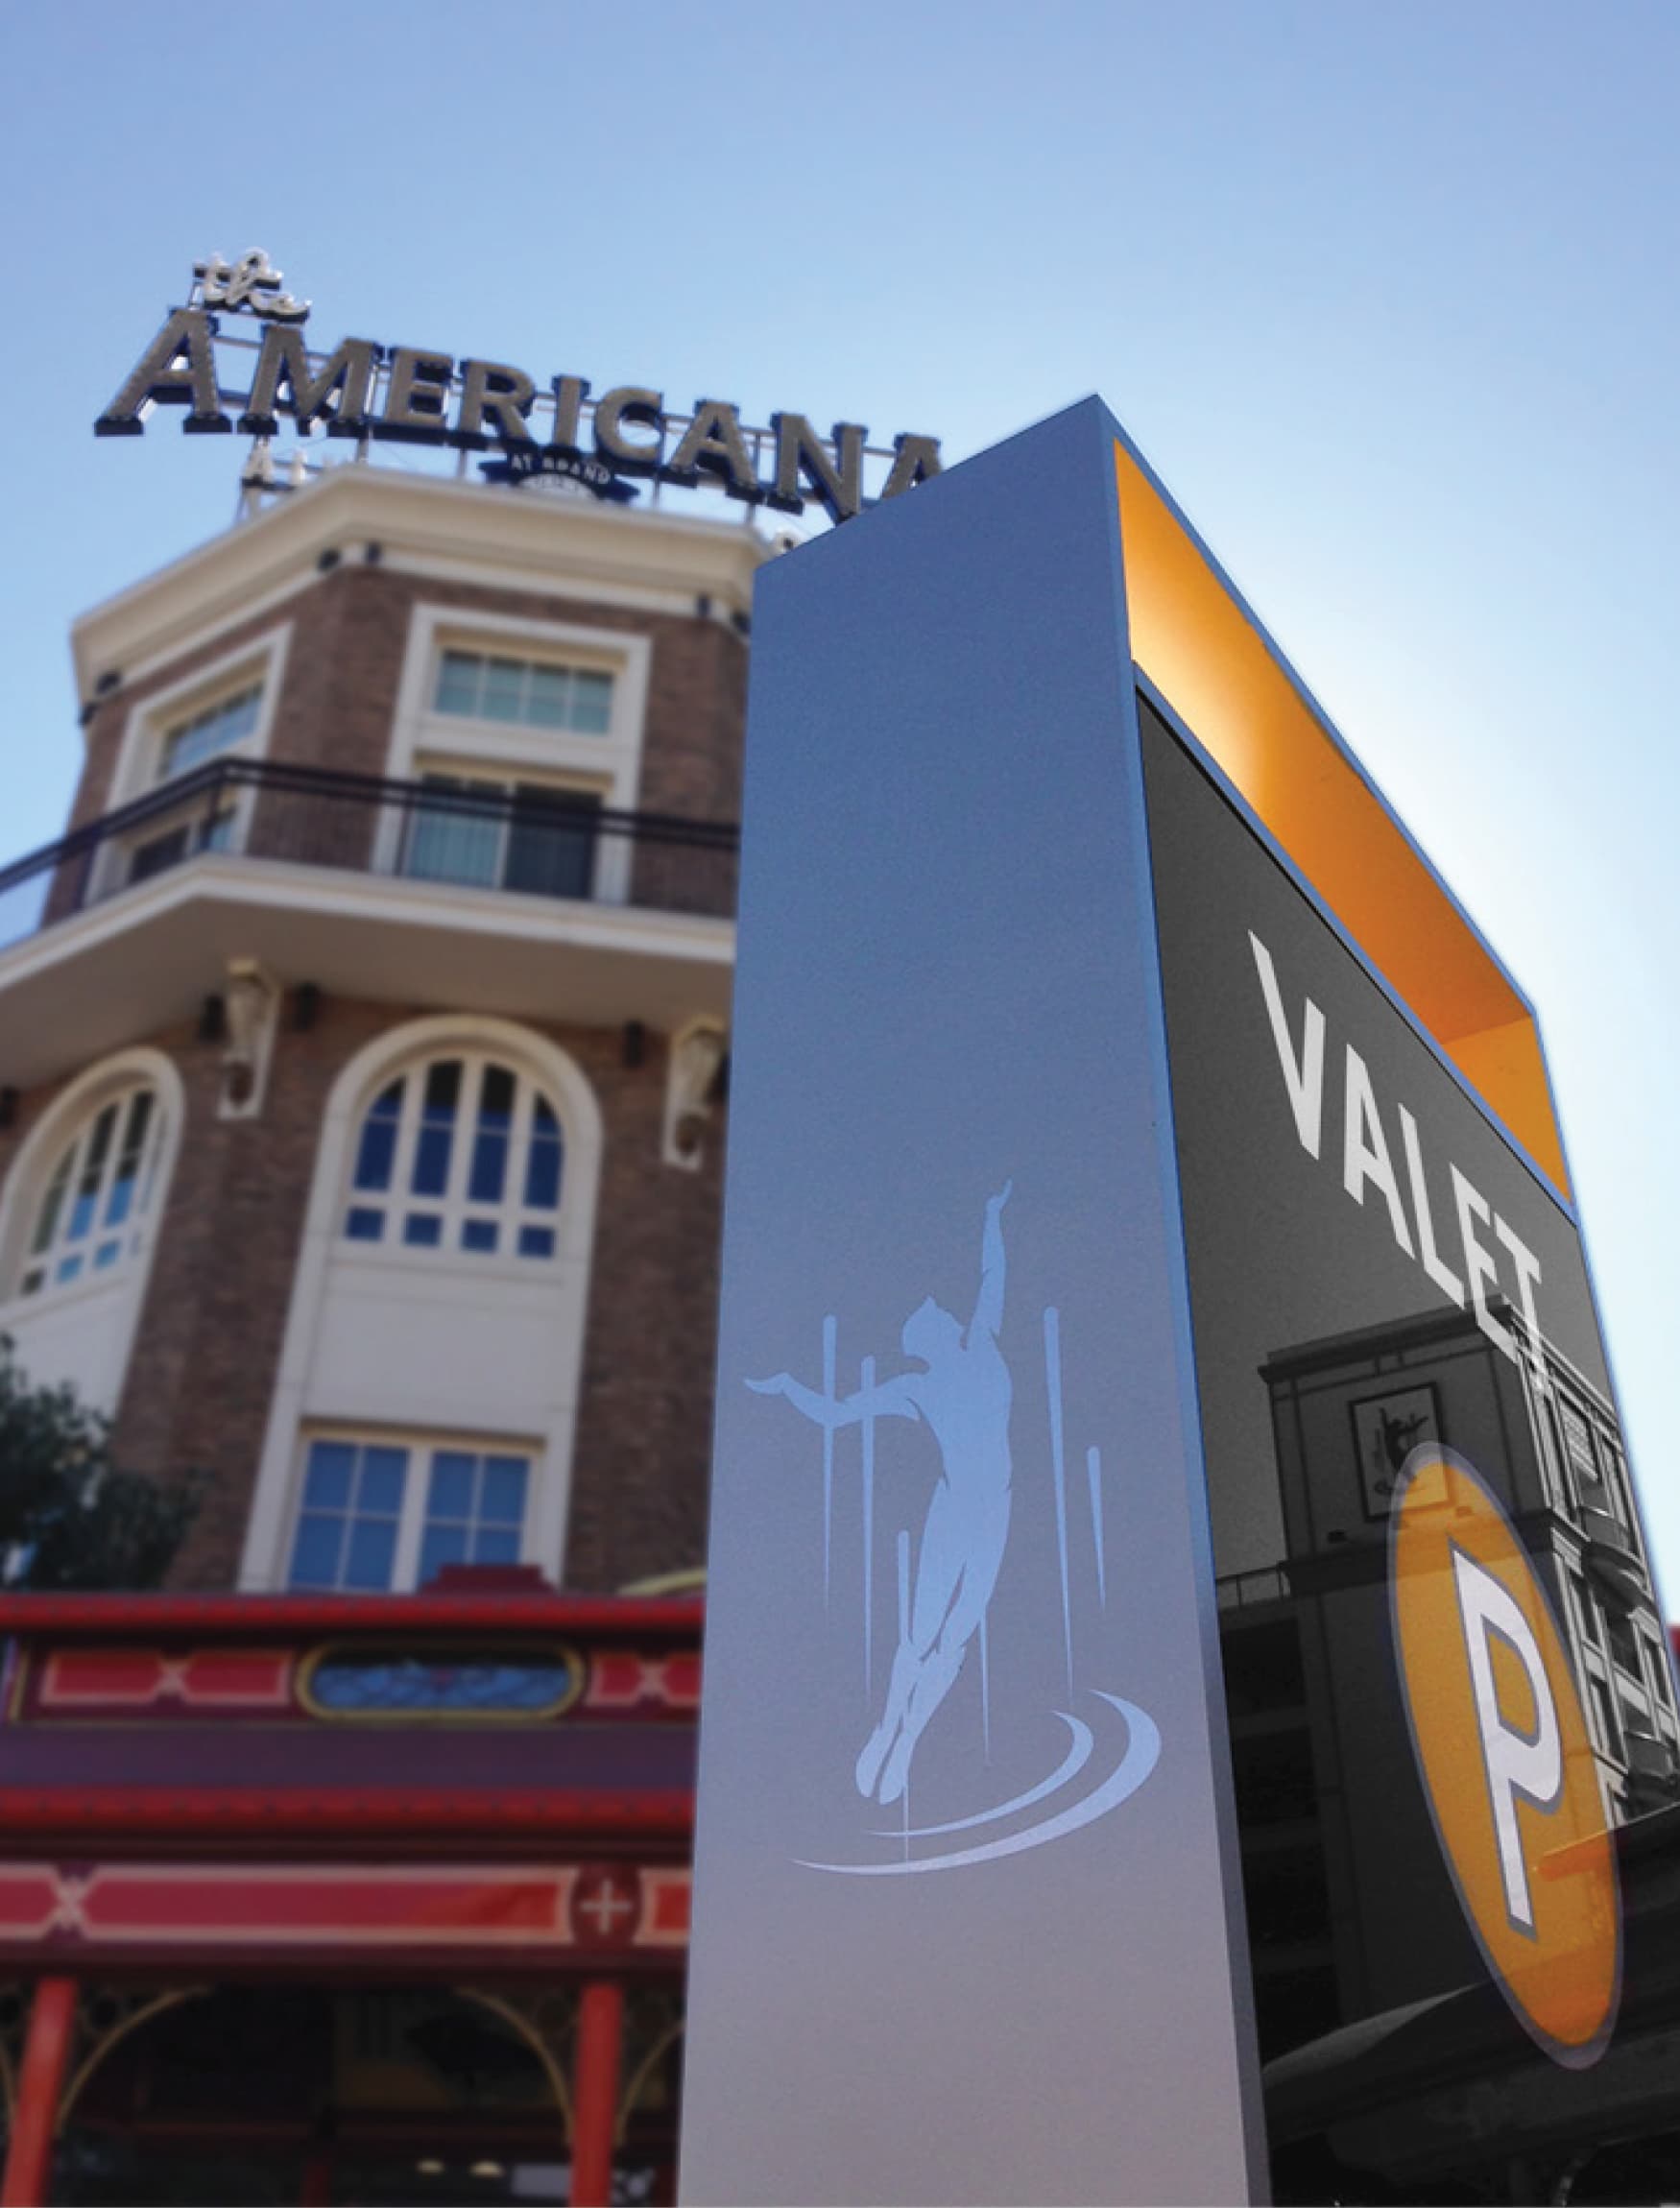 Detail shot of the wayfinding signage at Americana at Brand designed by RSM Design 